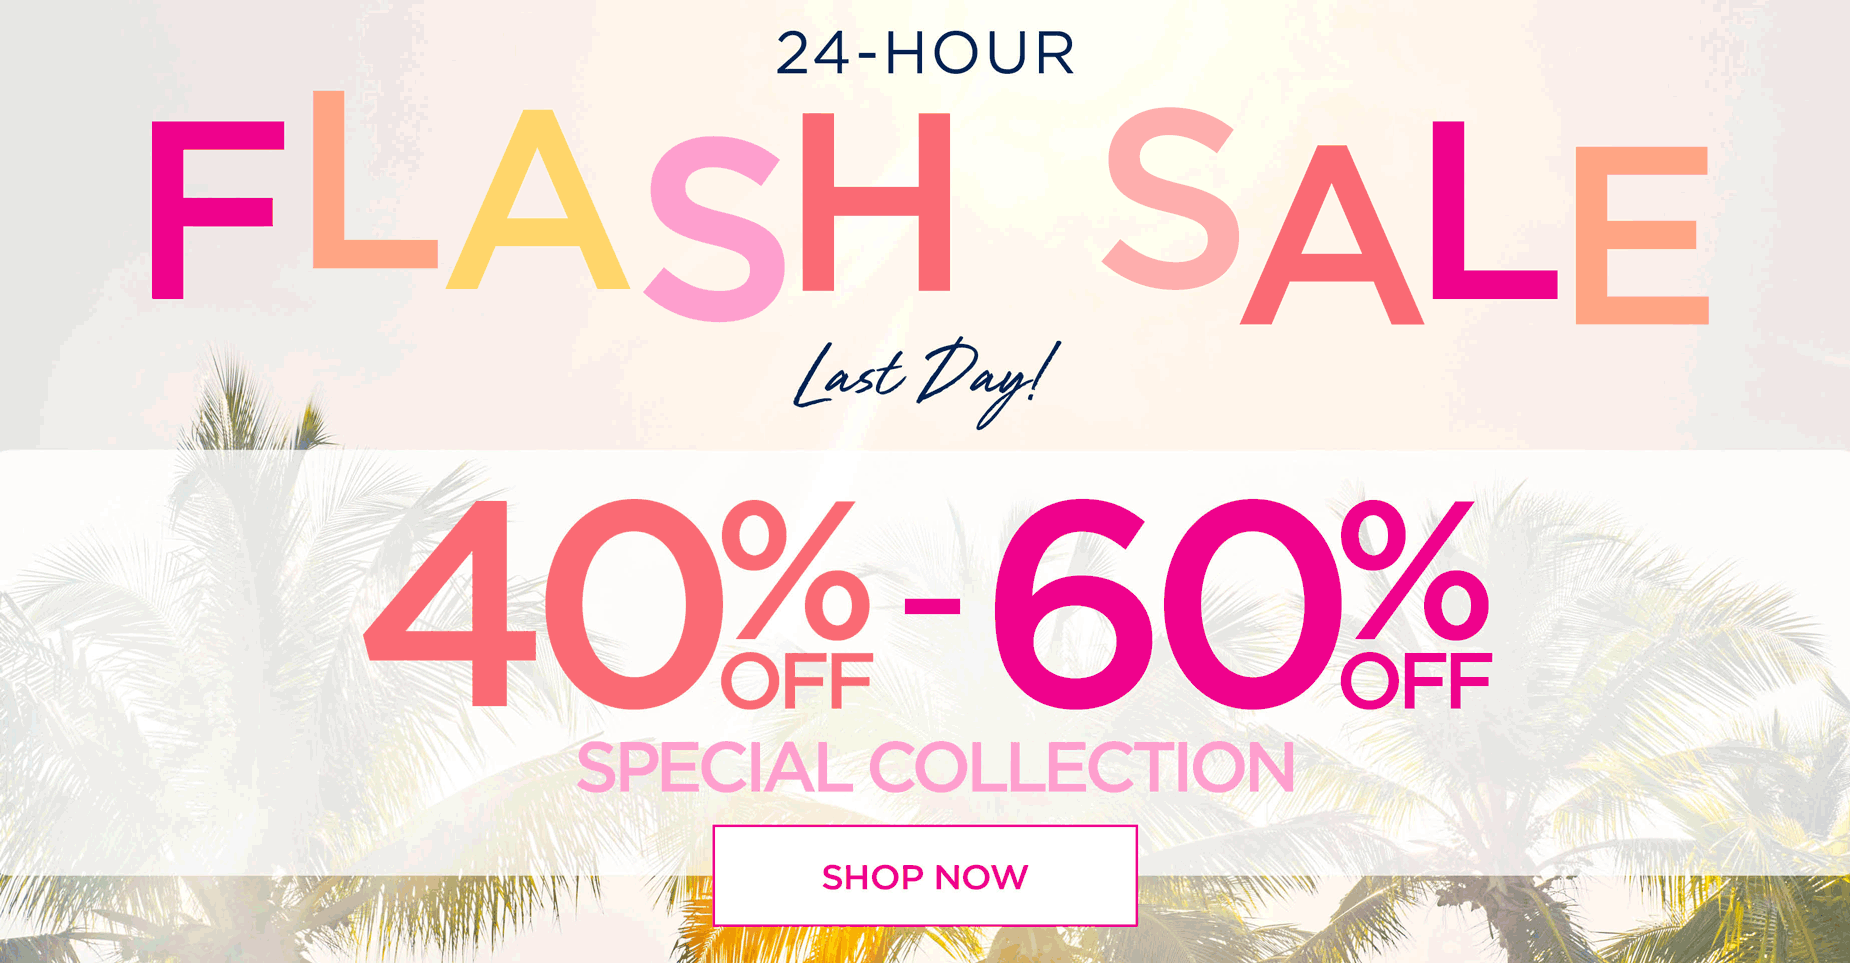 SHOP THE FLASH SALE NOW AND SAVE 40 to 60% OFF THE SPECIAL COLLECTION